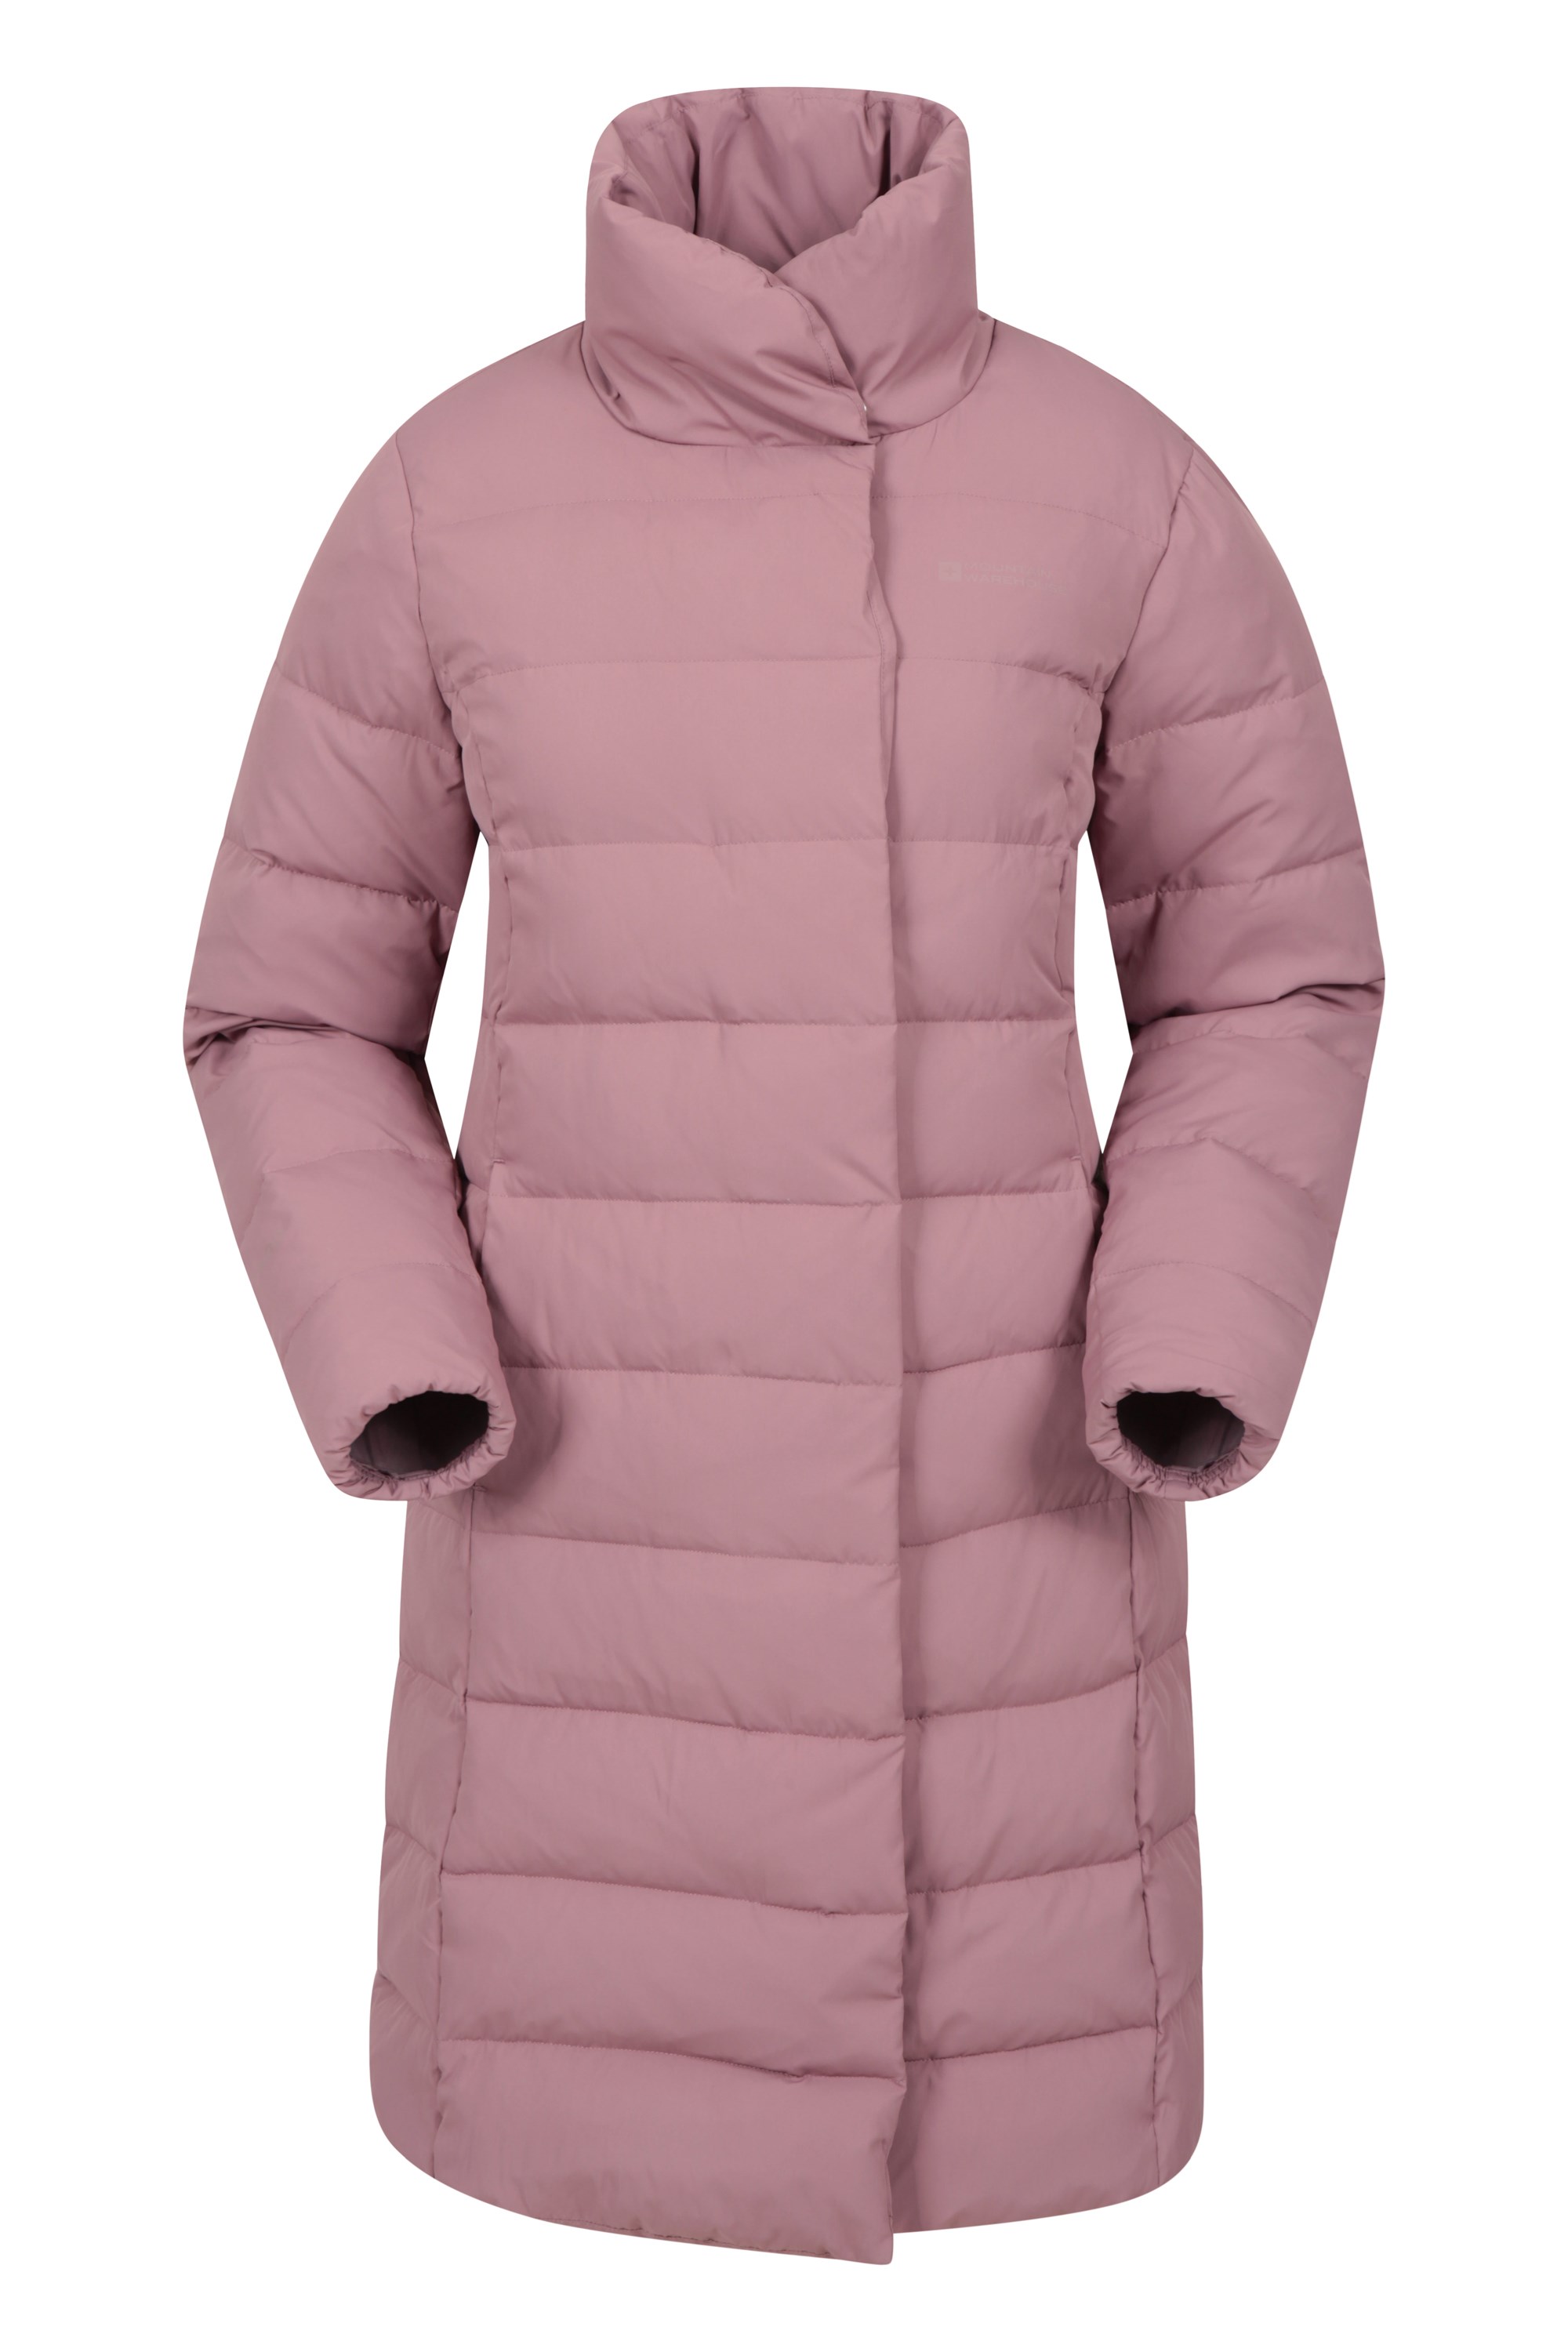 Mountain Warehouse Wrapped Up Womens Down Jacket Purple